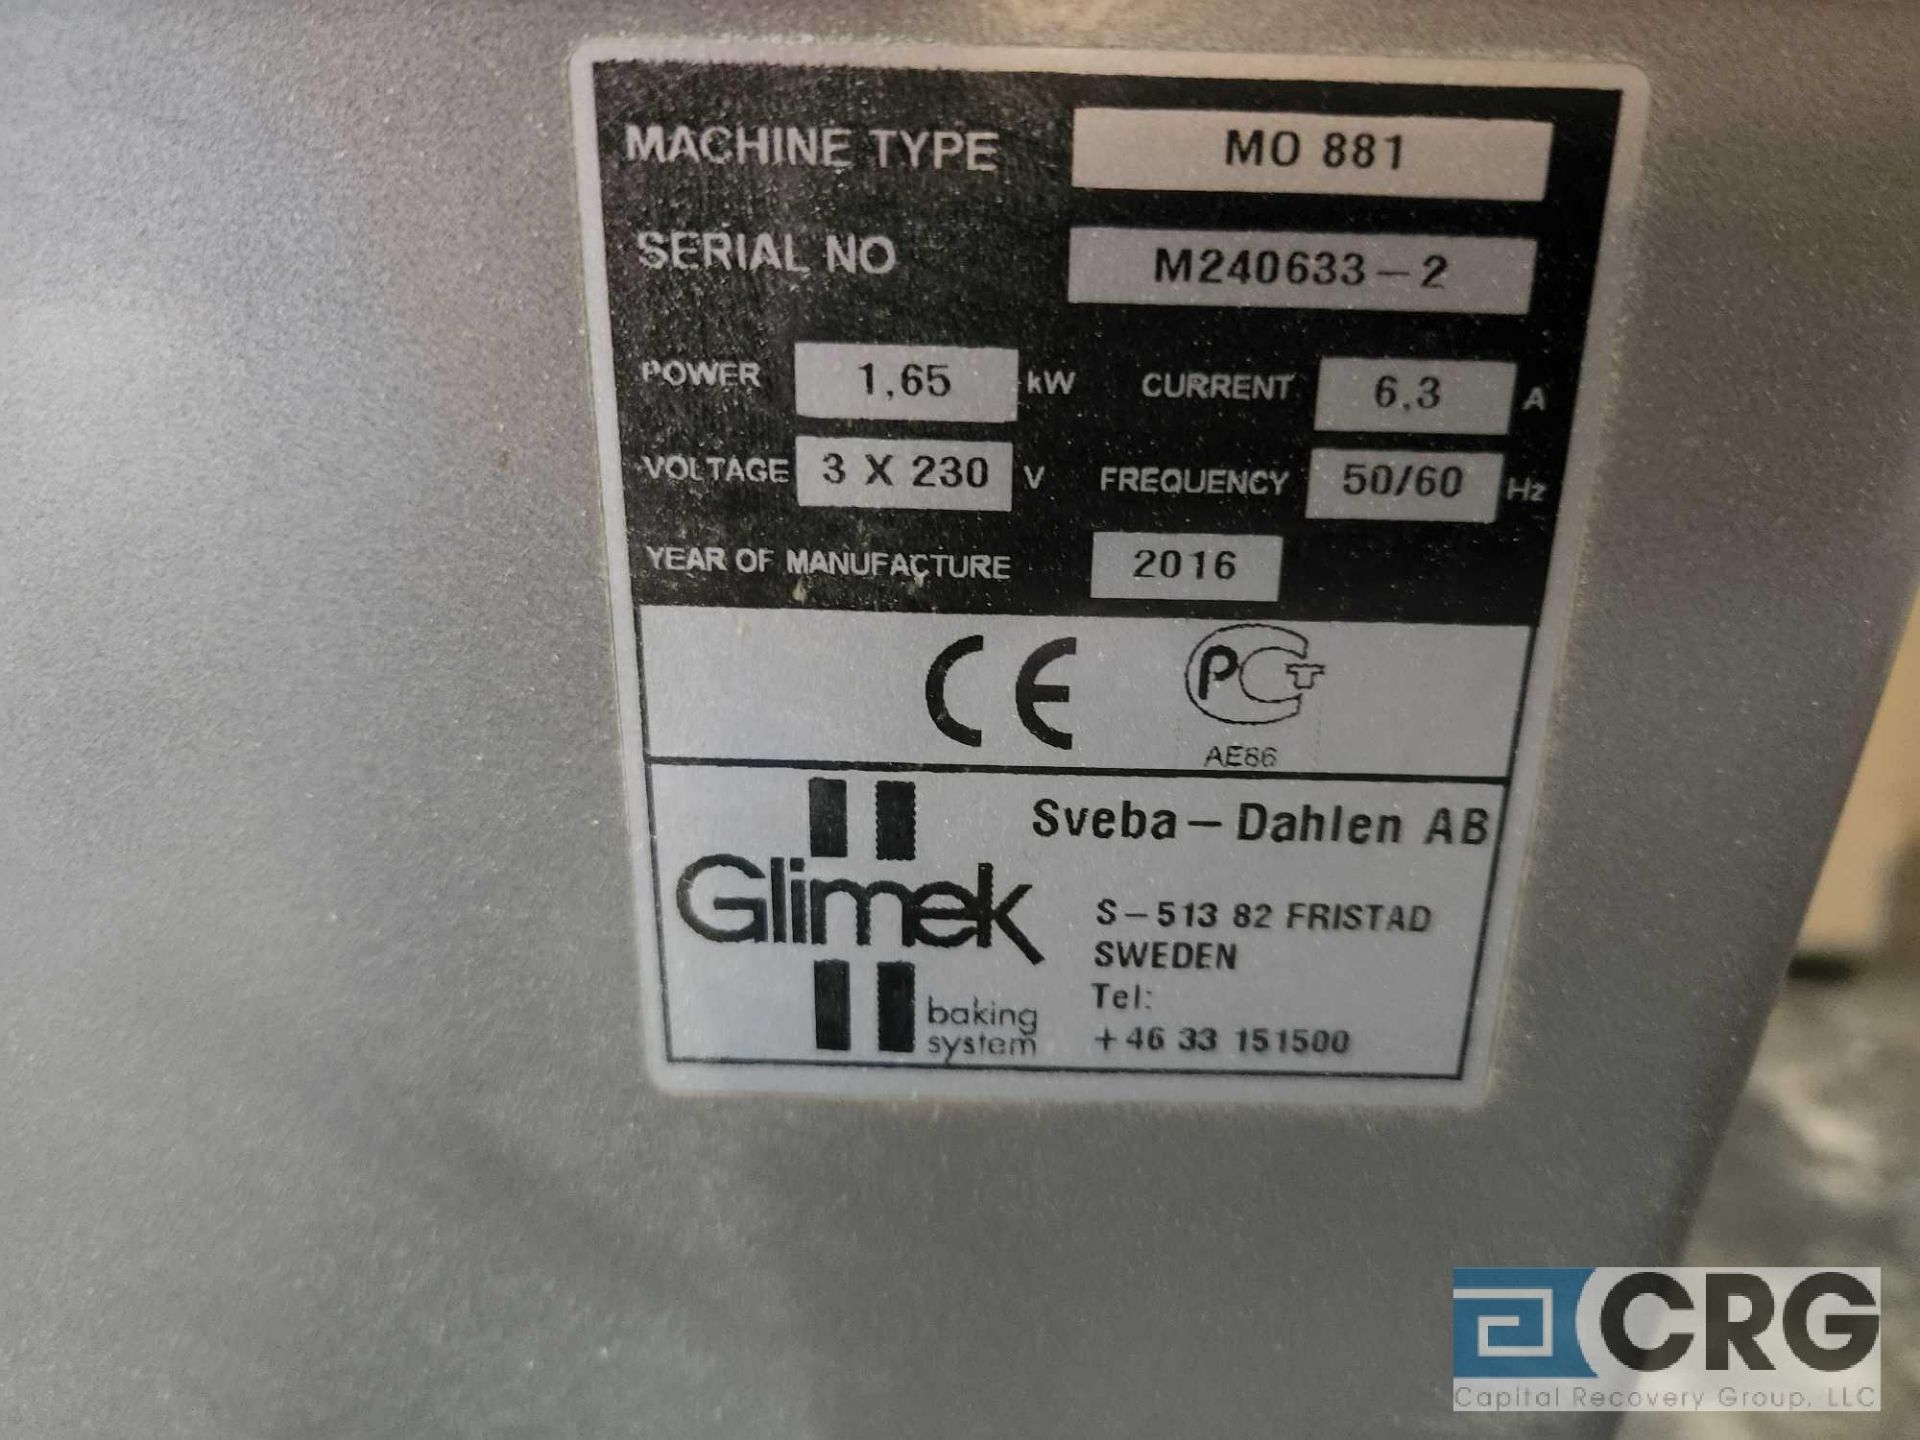 Glimek MO-881 molder with outfeed, (Subject to Entirety Bid Lot 115) - Image 2 of 2